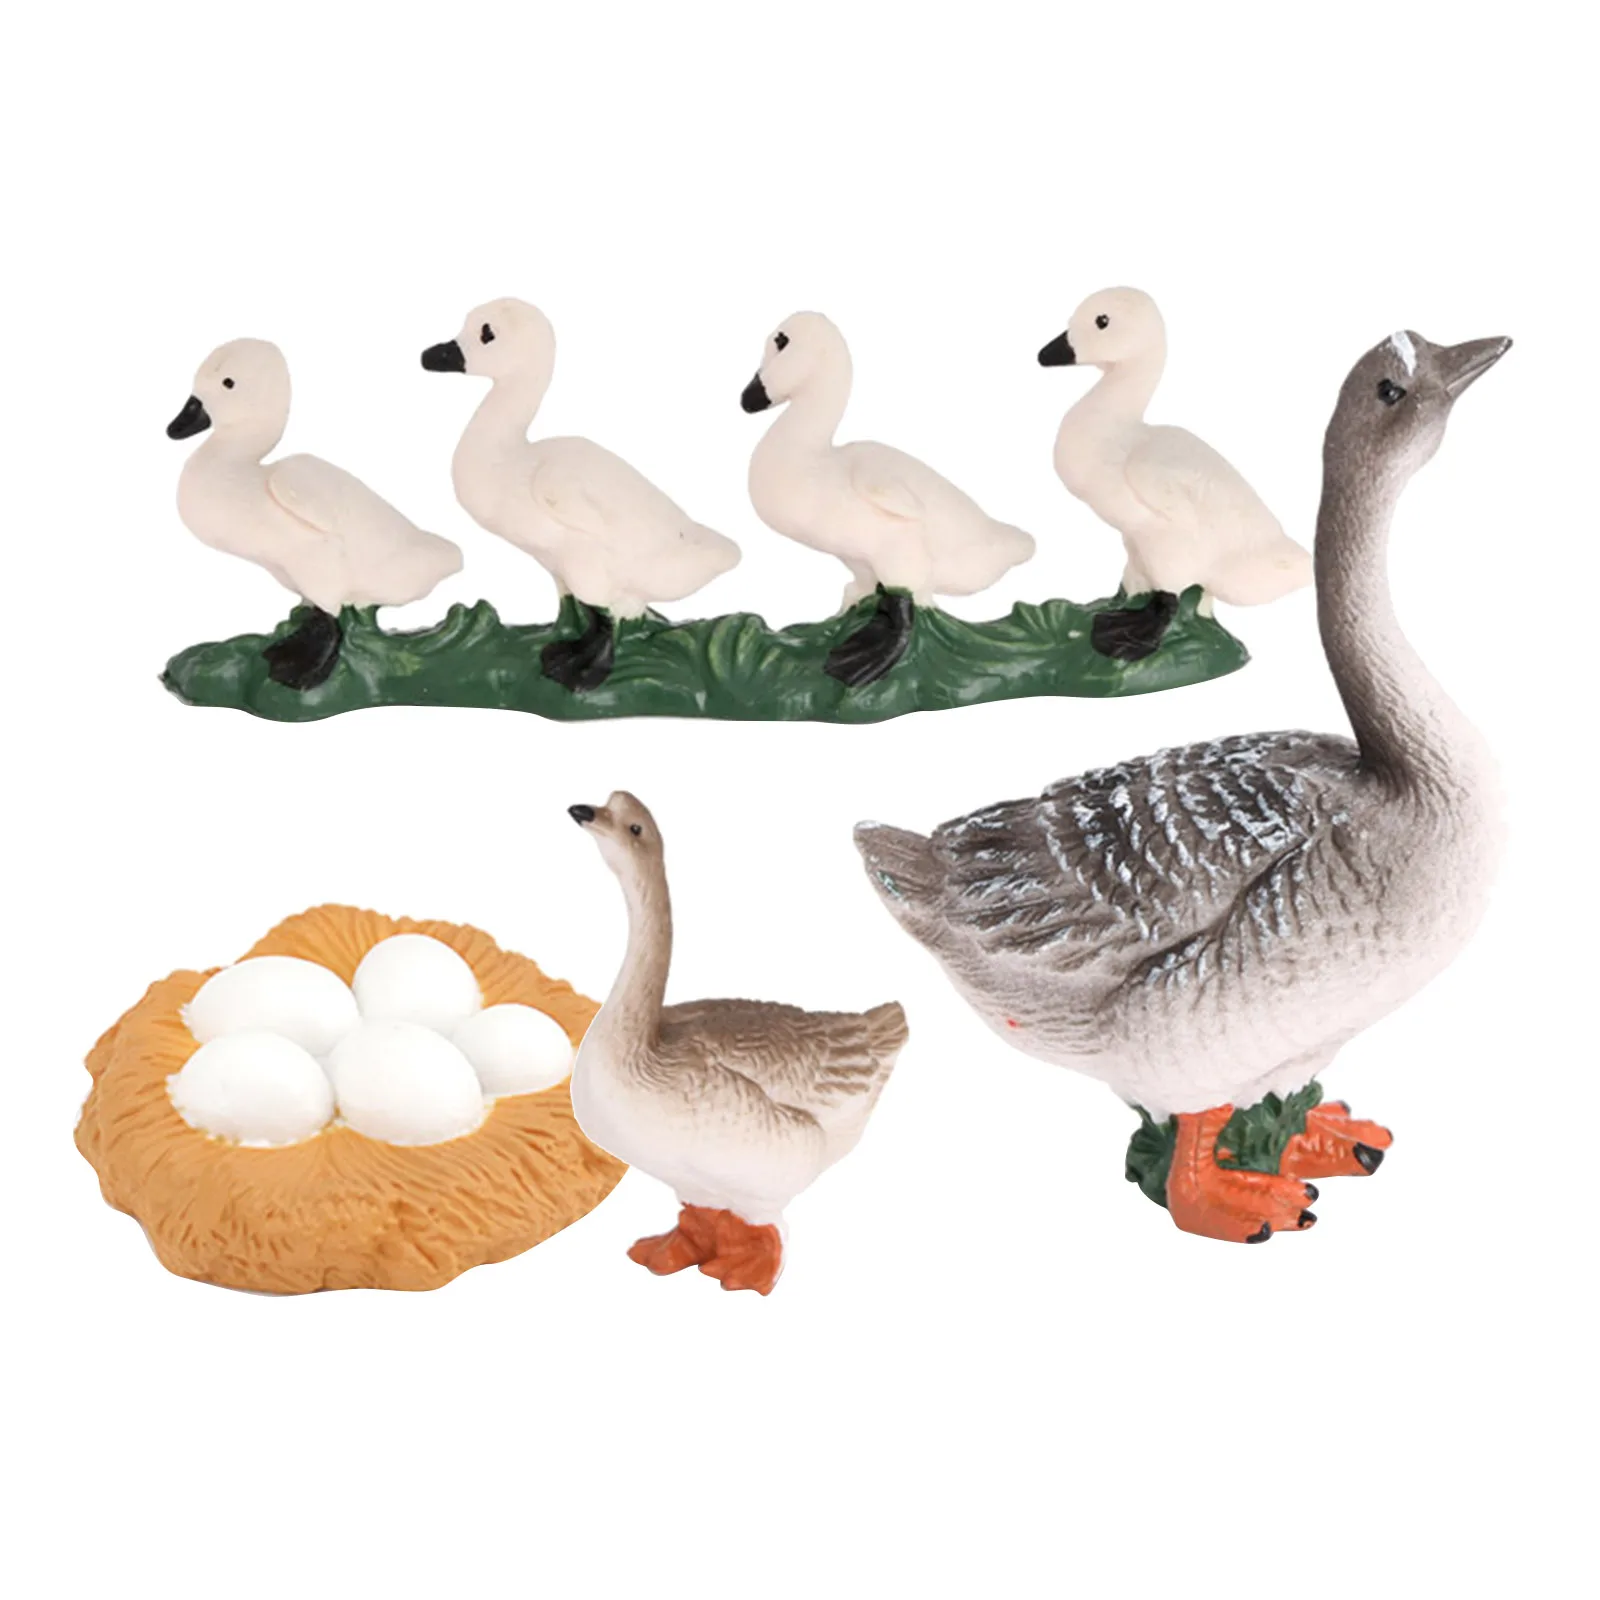 Realistic Growth Cycle Plastic Life Cycle Goose Model Biology Toy Teaching Aids